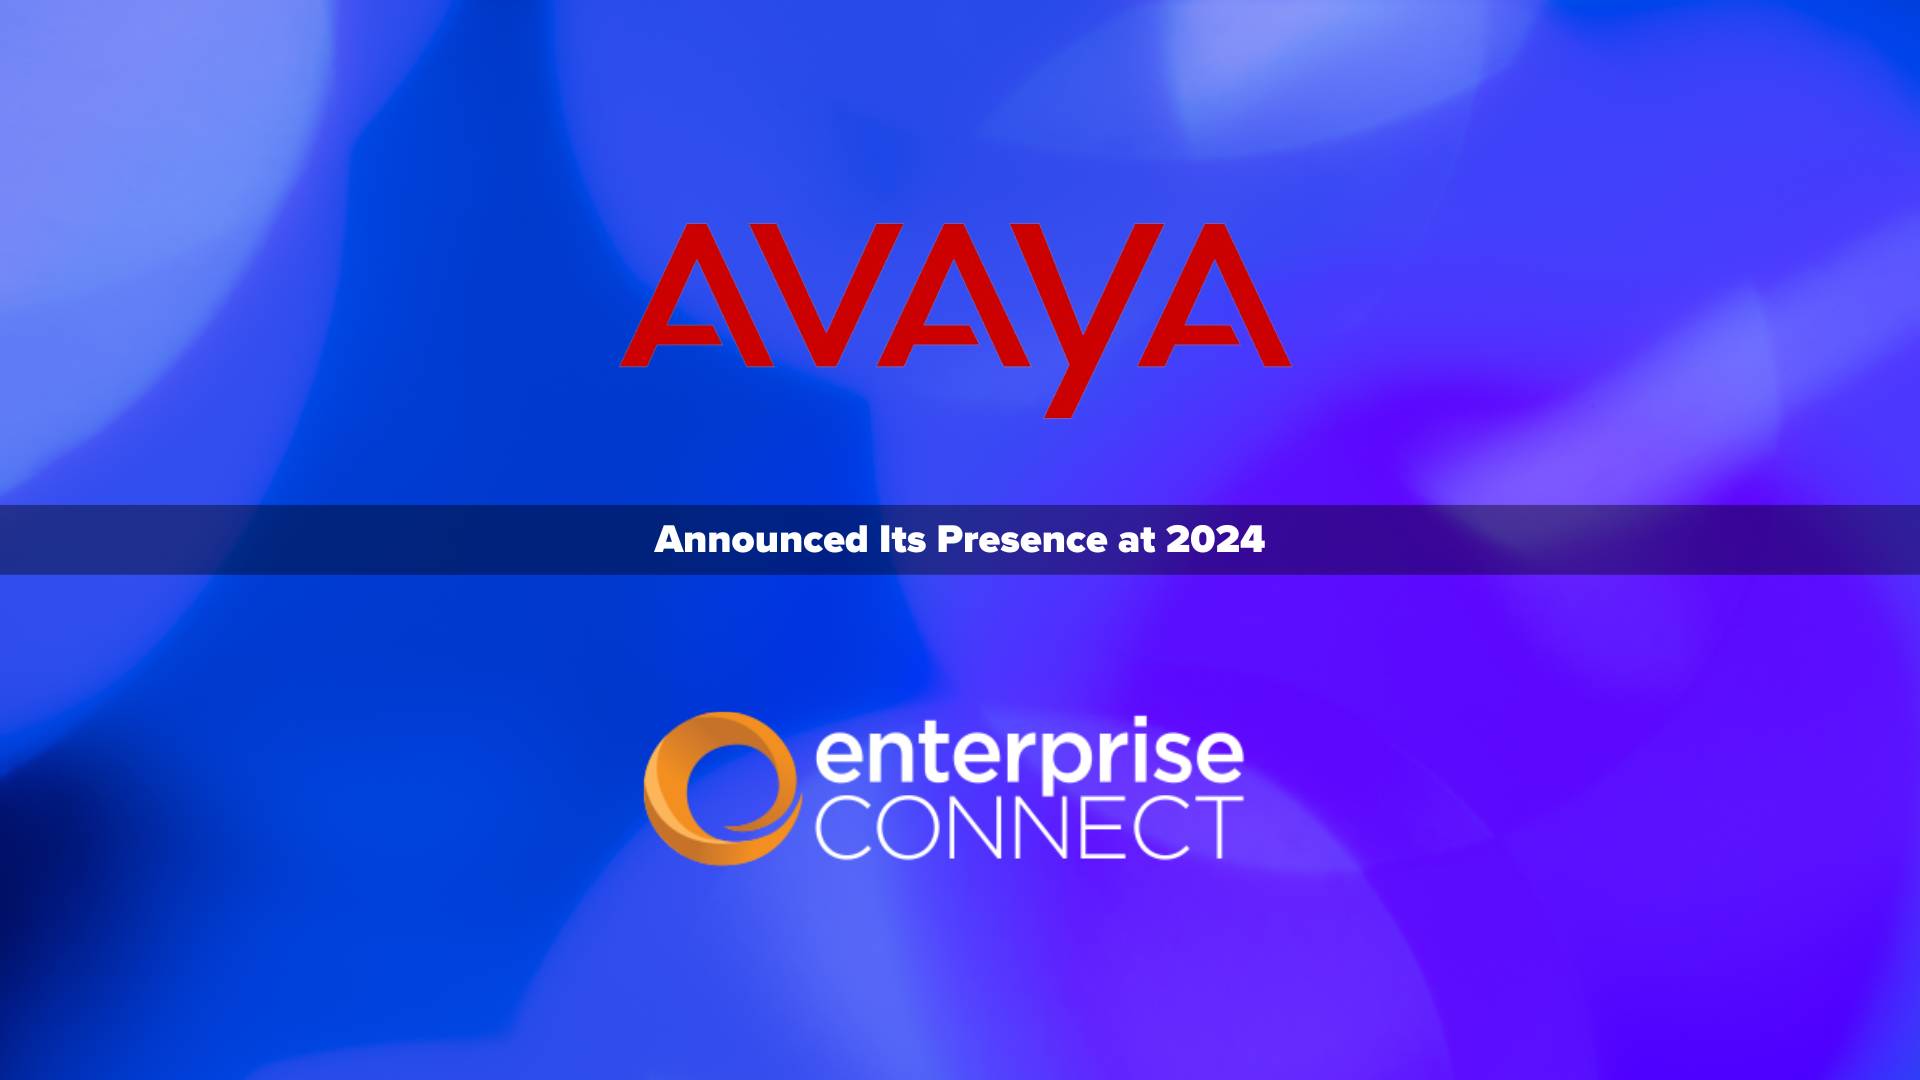 Avaya to Deliver AI-Powered Customer Experience Use Cases and Insights at Enterprise Connect 2024